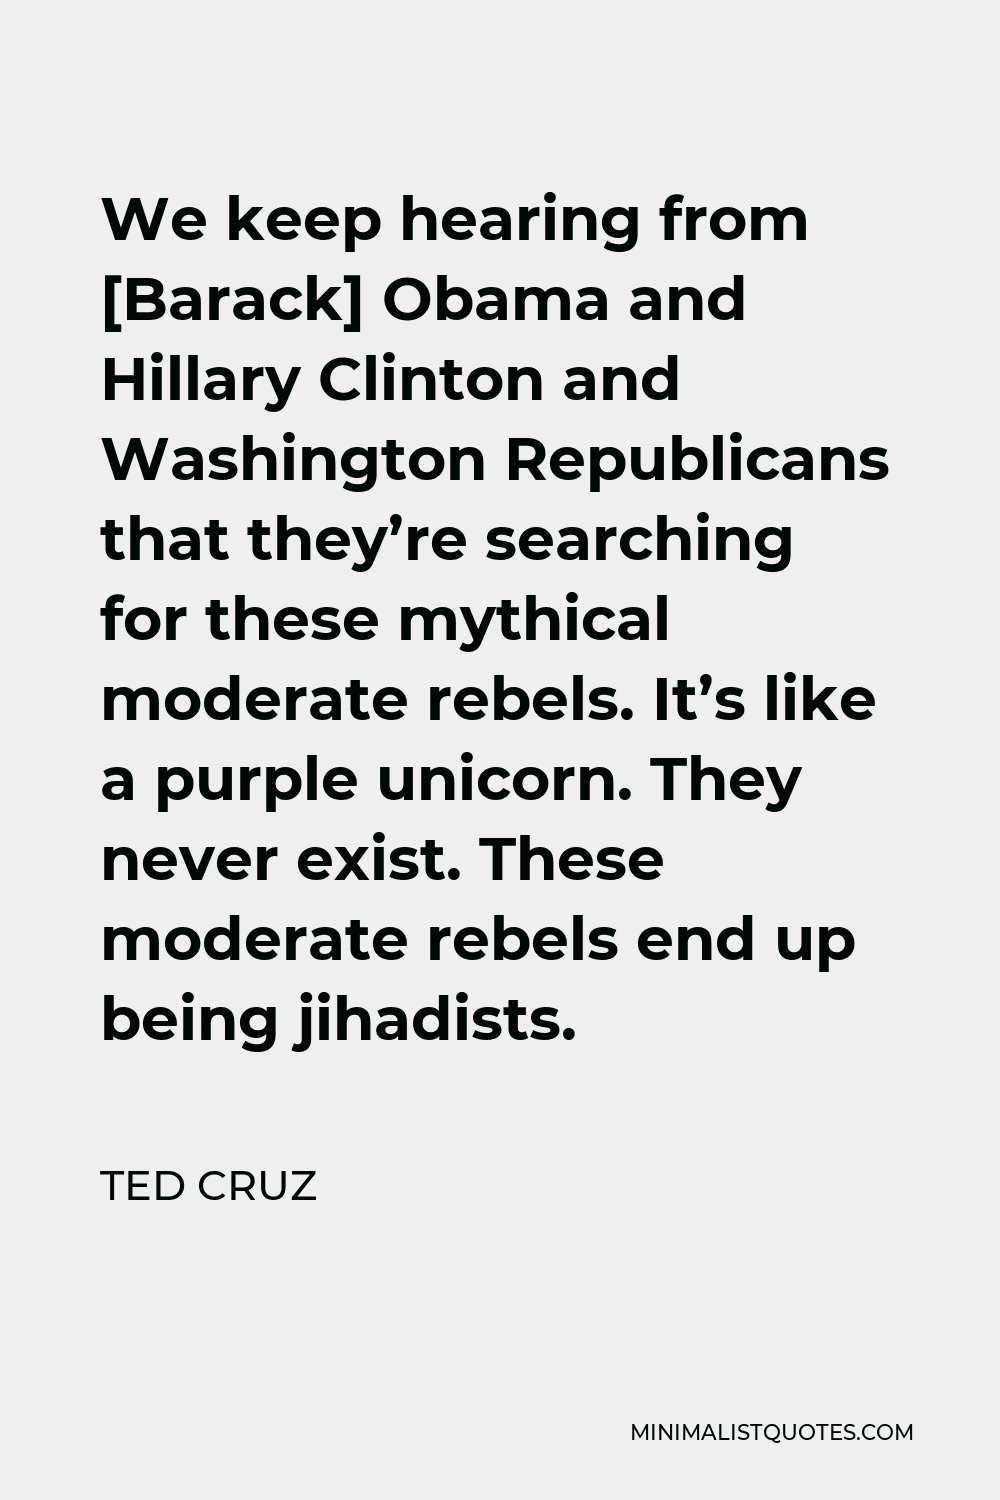 Ted Cruz Quote - We keep hearing from [Barack] Obama and Hillary Clinton and Washington Republicans that they’re searching for these mythical moderate rebels. It’s like a purple unicorn. They never exist. These moderate rebels end up being jihadists.